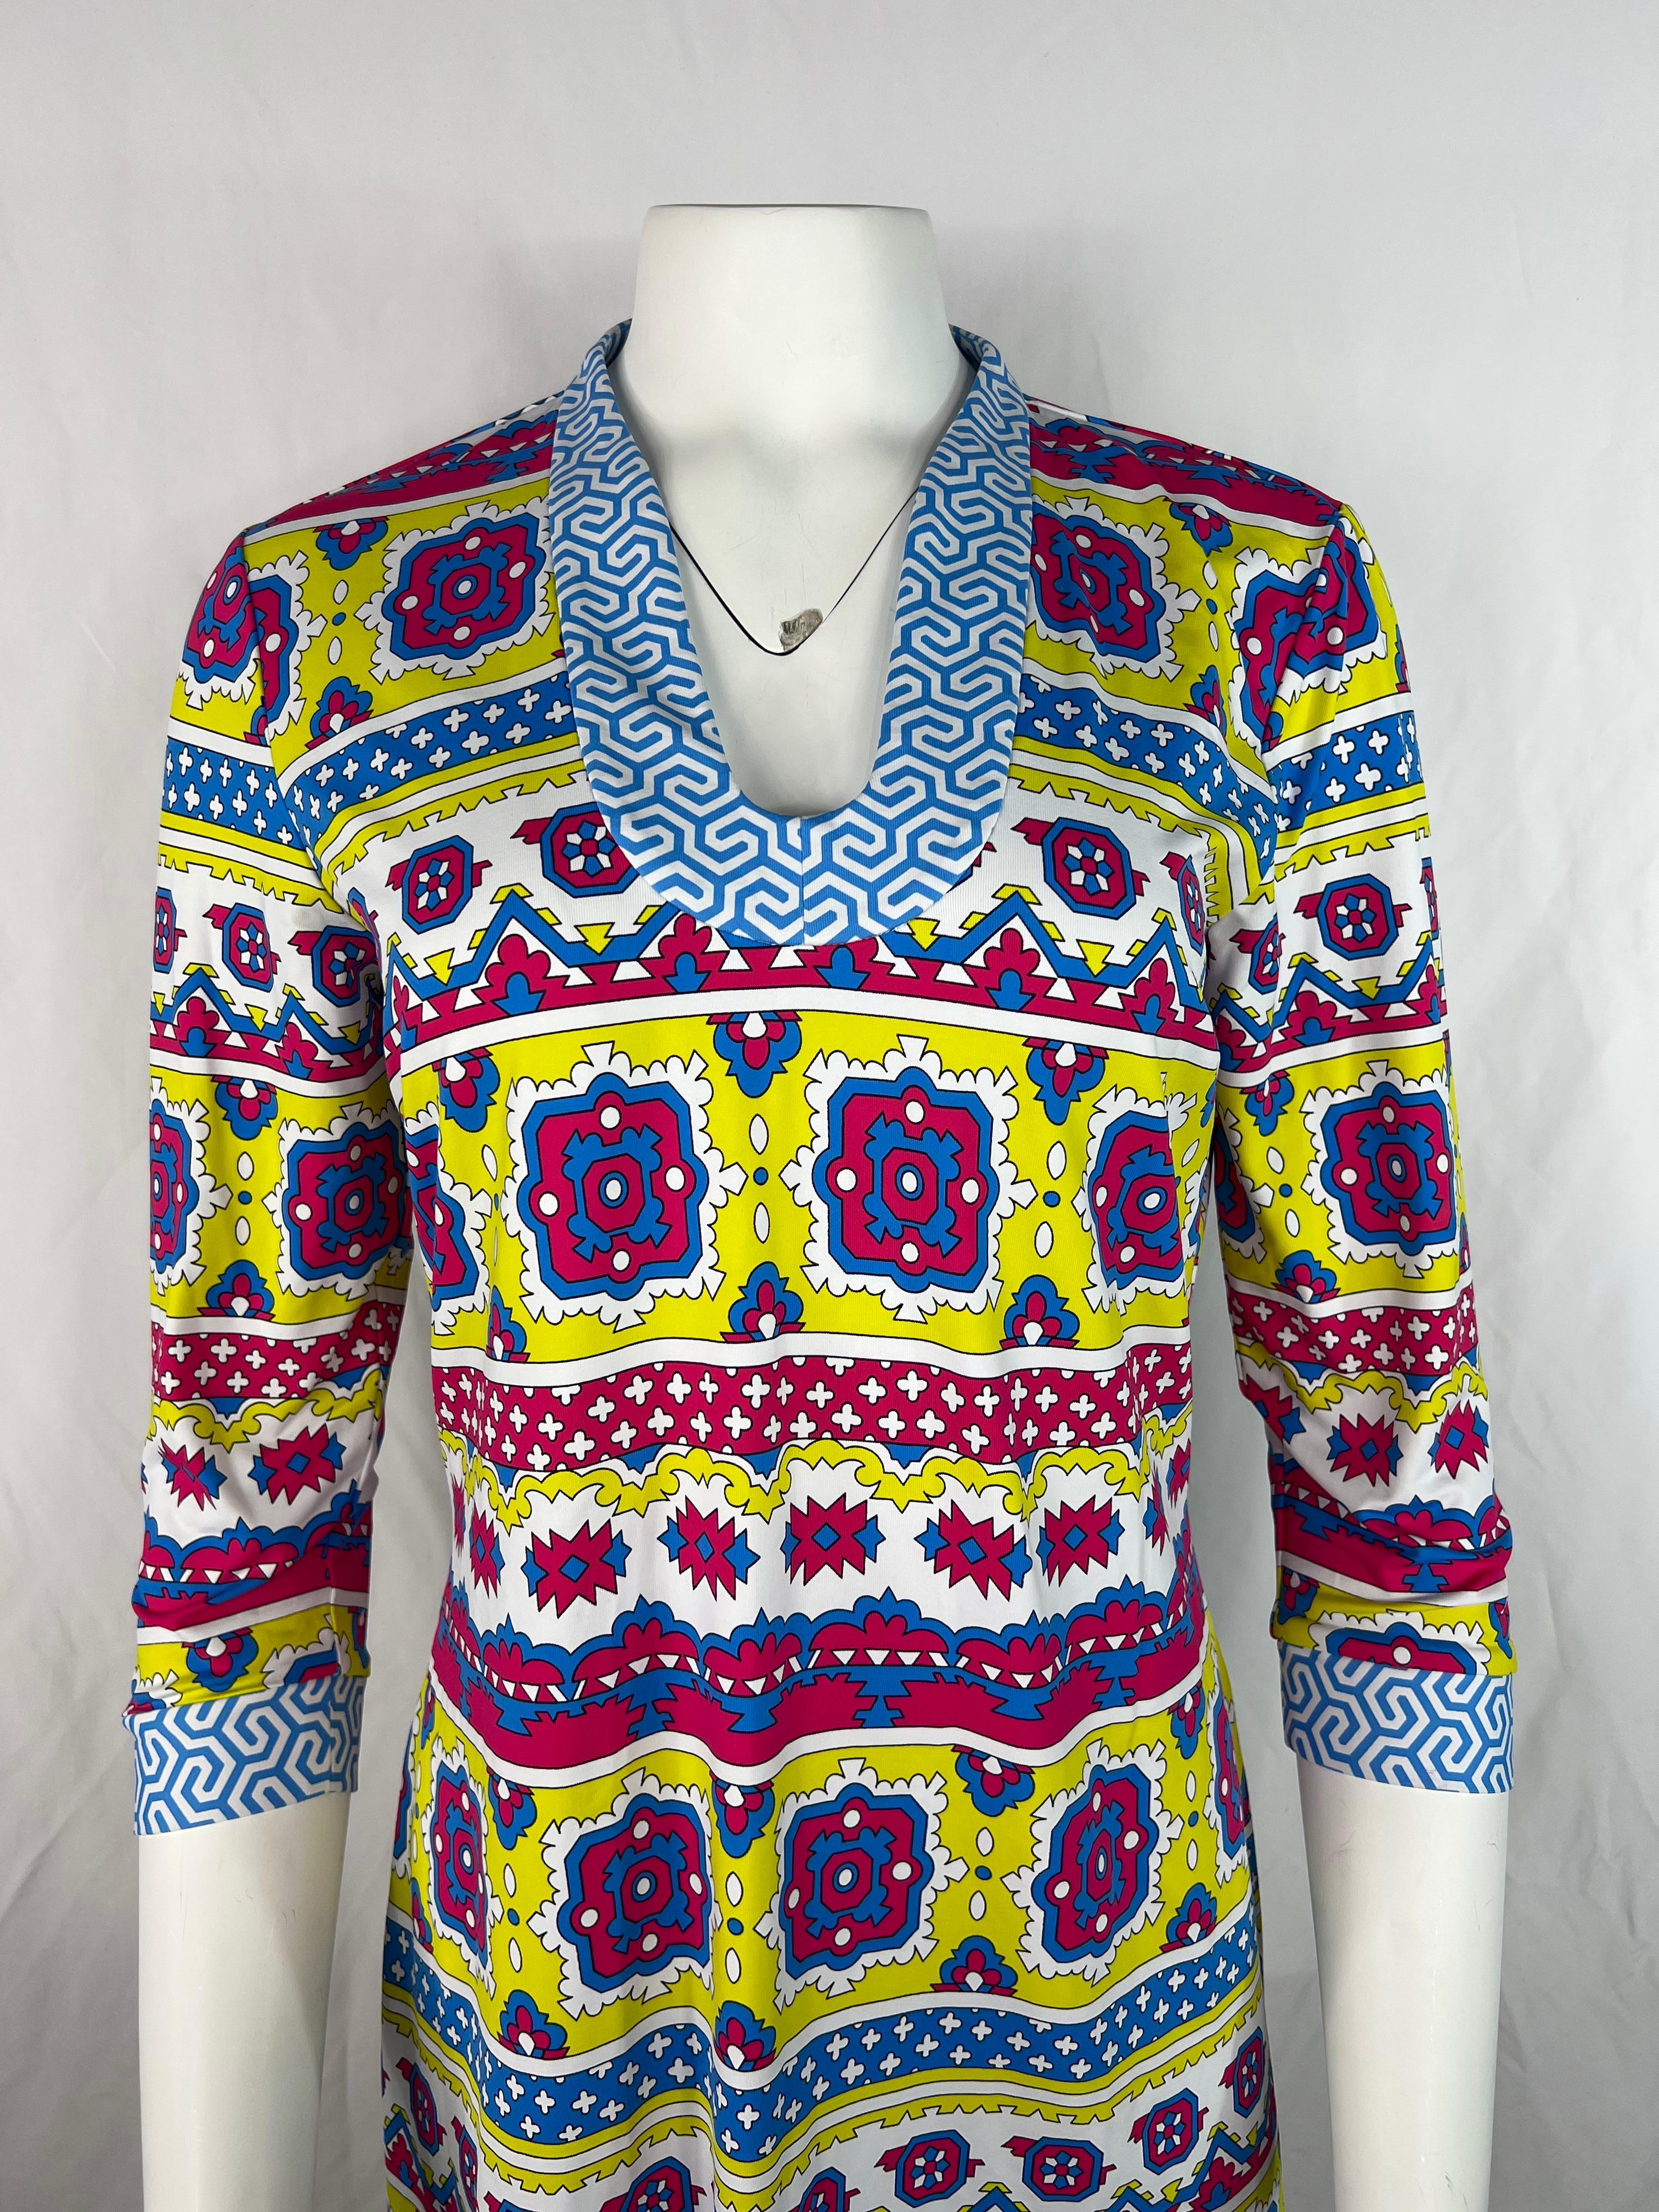 Product details:

The dress features pink, blue, yellow and white colors, geometric pattern print, tunic style with 3/4 sleeve length.